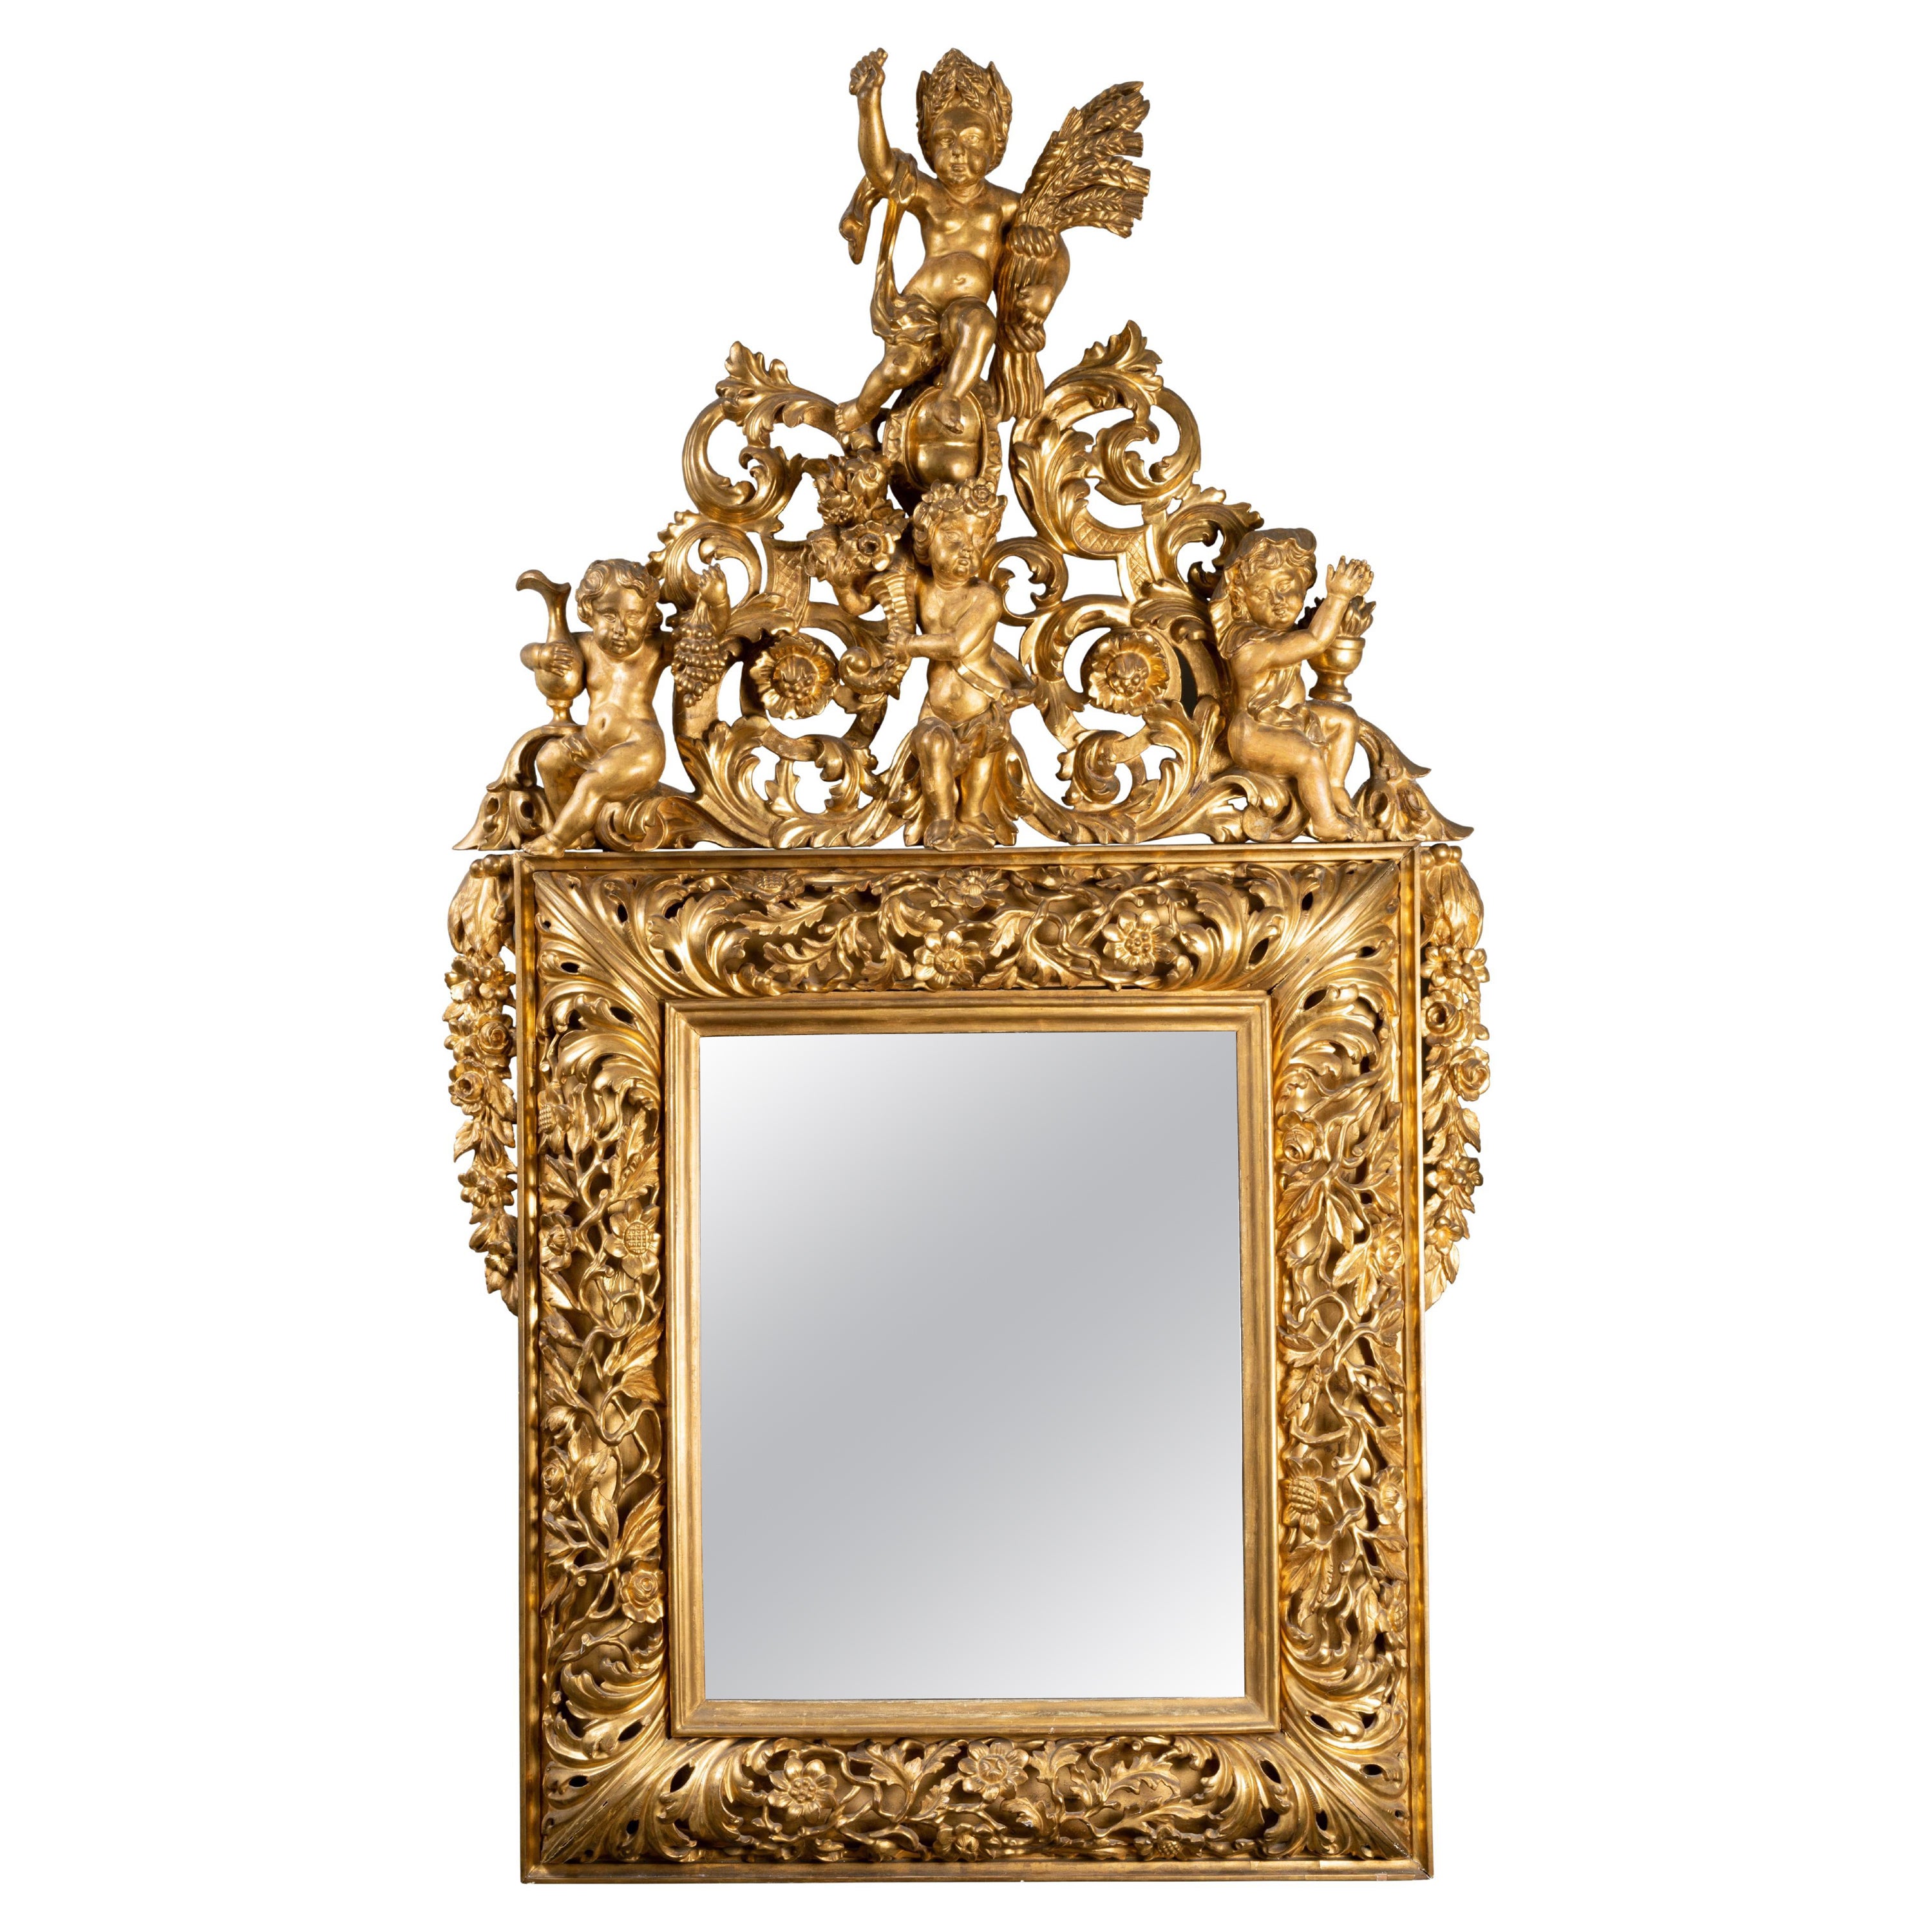 Early 18th Century Italian Carved Giltwood Mirror Depicting Four Seasons For Sale